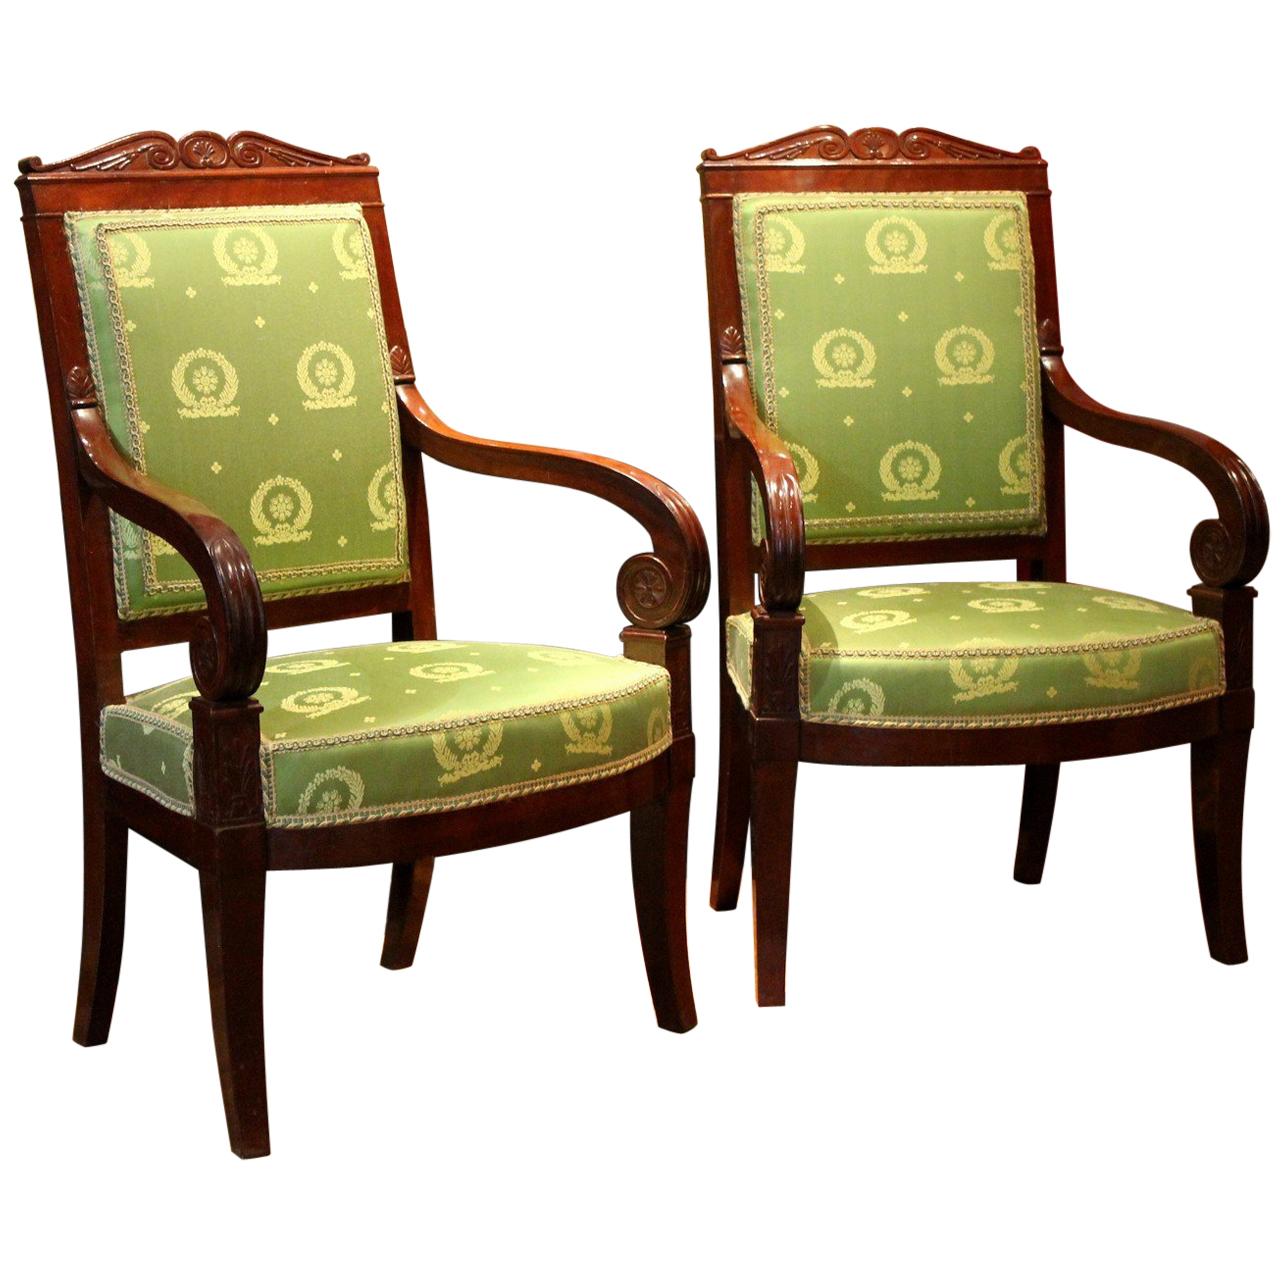 Jacob French 18th Century Mahogany and Green Silk Upholster High Back Armchairs For Sale